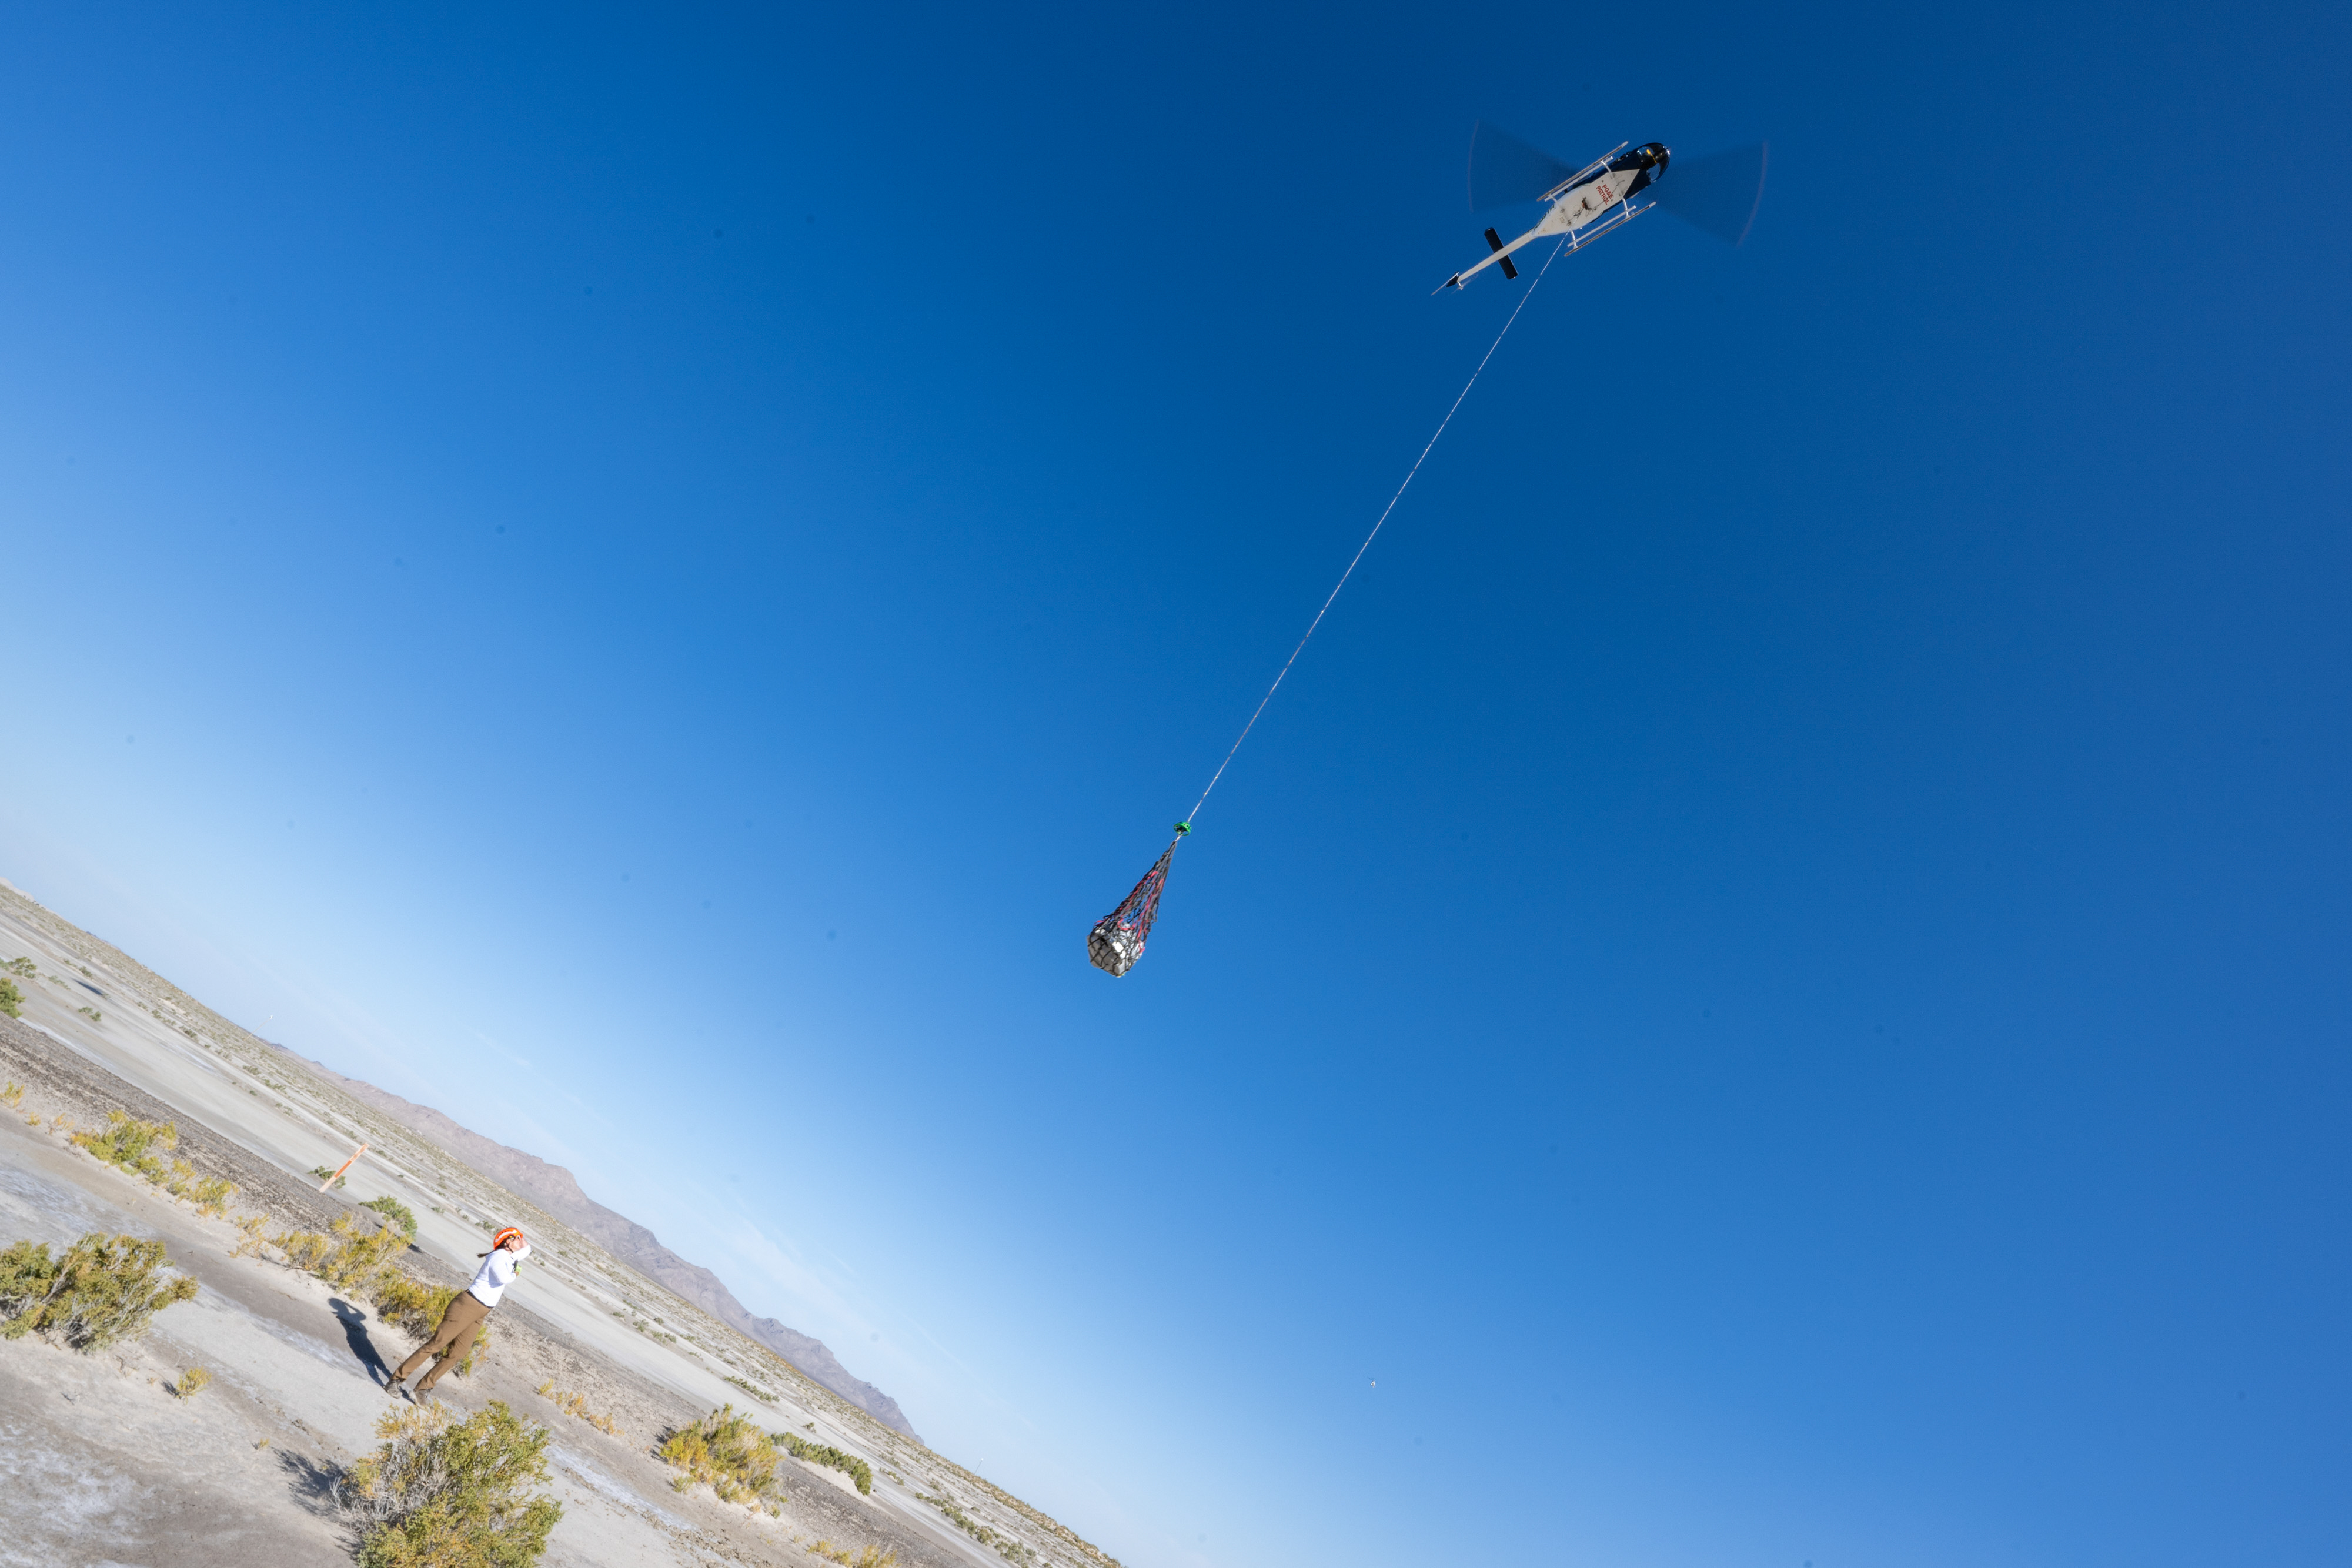 The sample capsule is suspended the helicopter by long line against a bright blue sky and the desert below. A woman looks up at the capsule as it departs.⁣